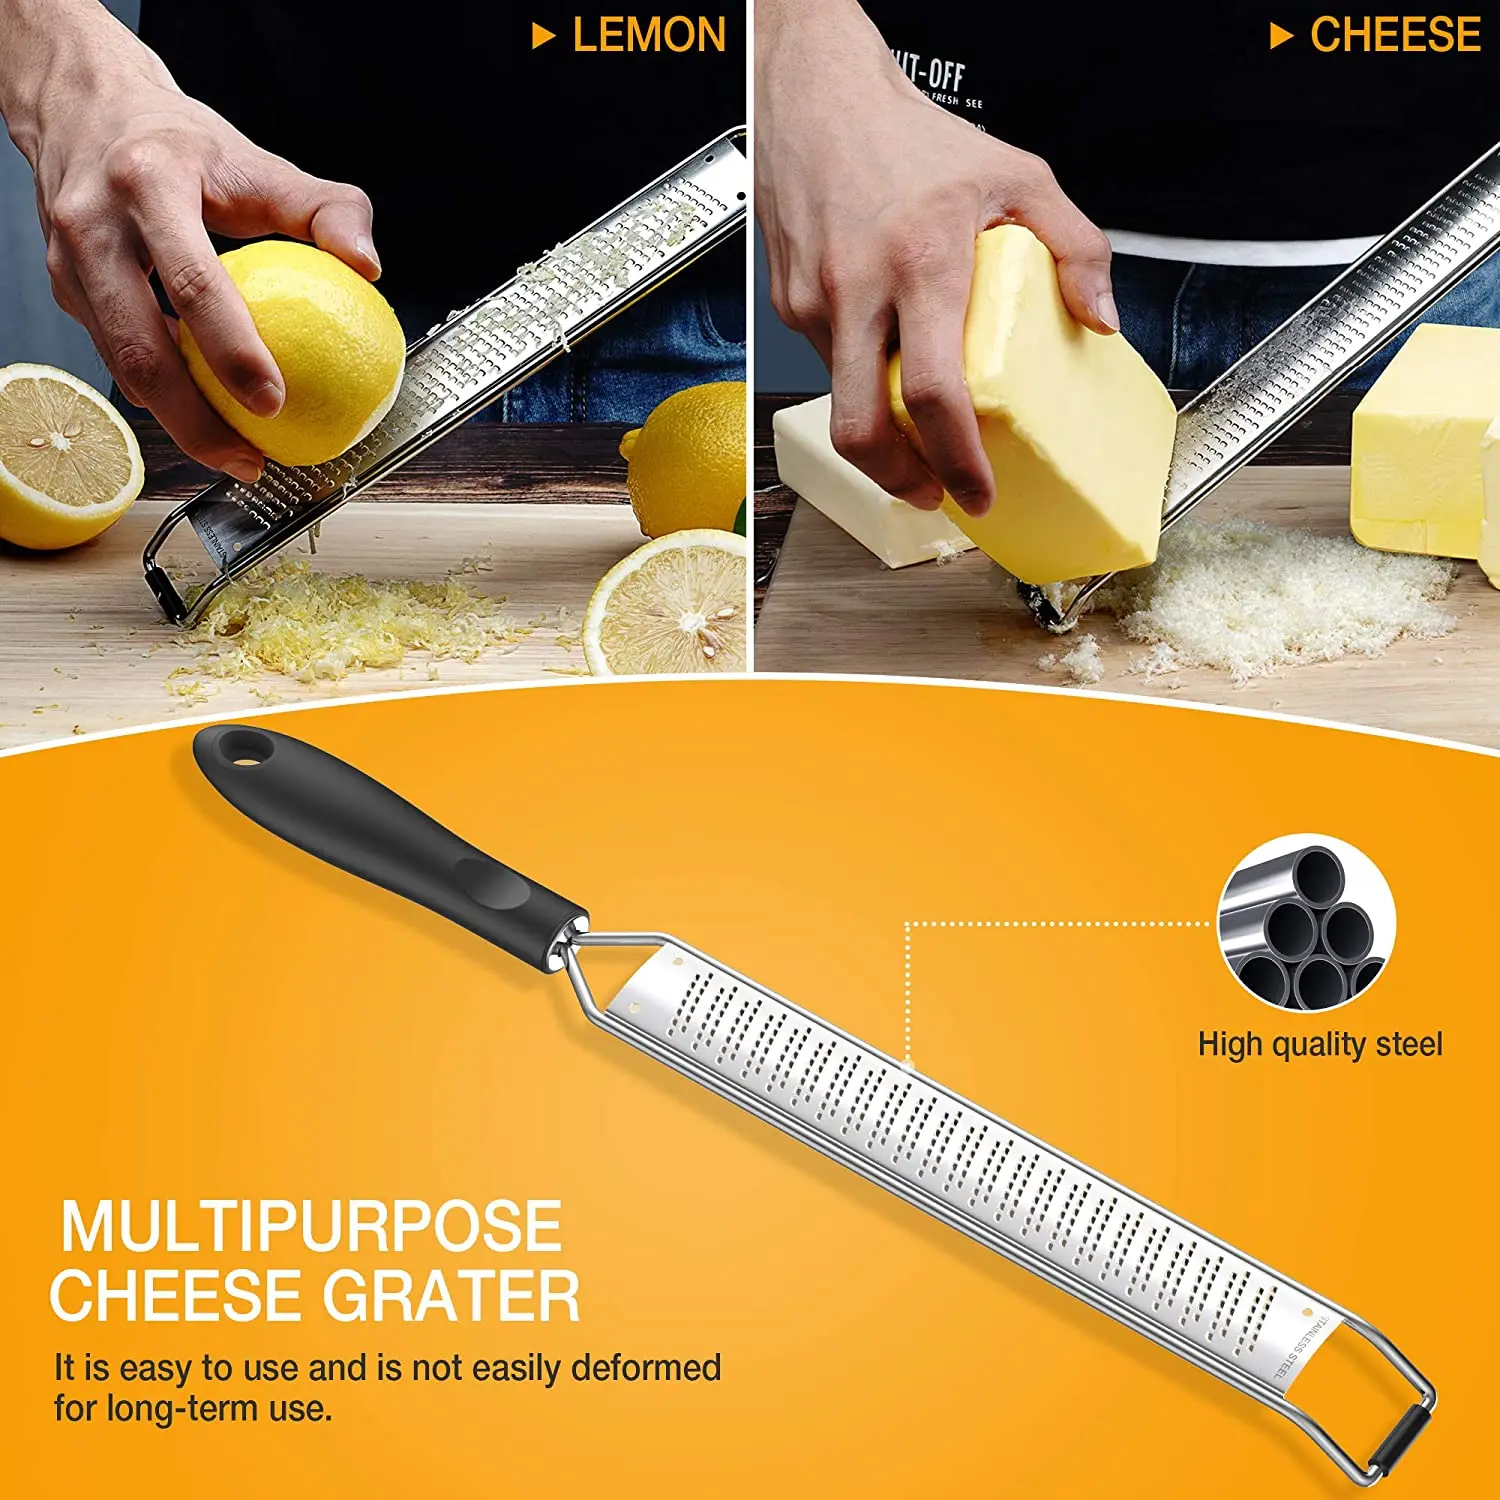 Sharp Stainless Steel Blade with Protective Cover and Cleaning Brush Lemon Zester Cheese Grater for Kitchen Garlic Ginger Nutmeg Vegetables Citrus Chocolate Friuts 